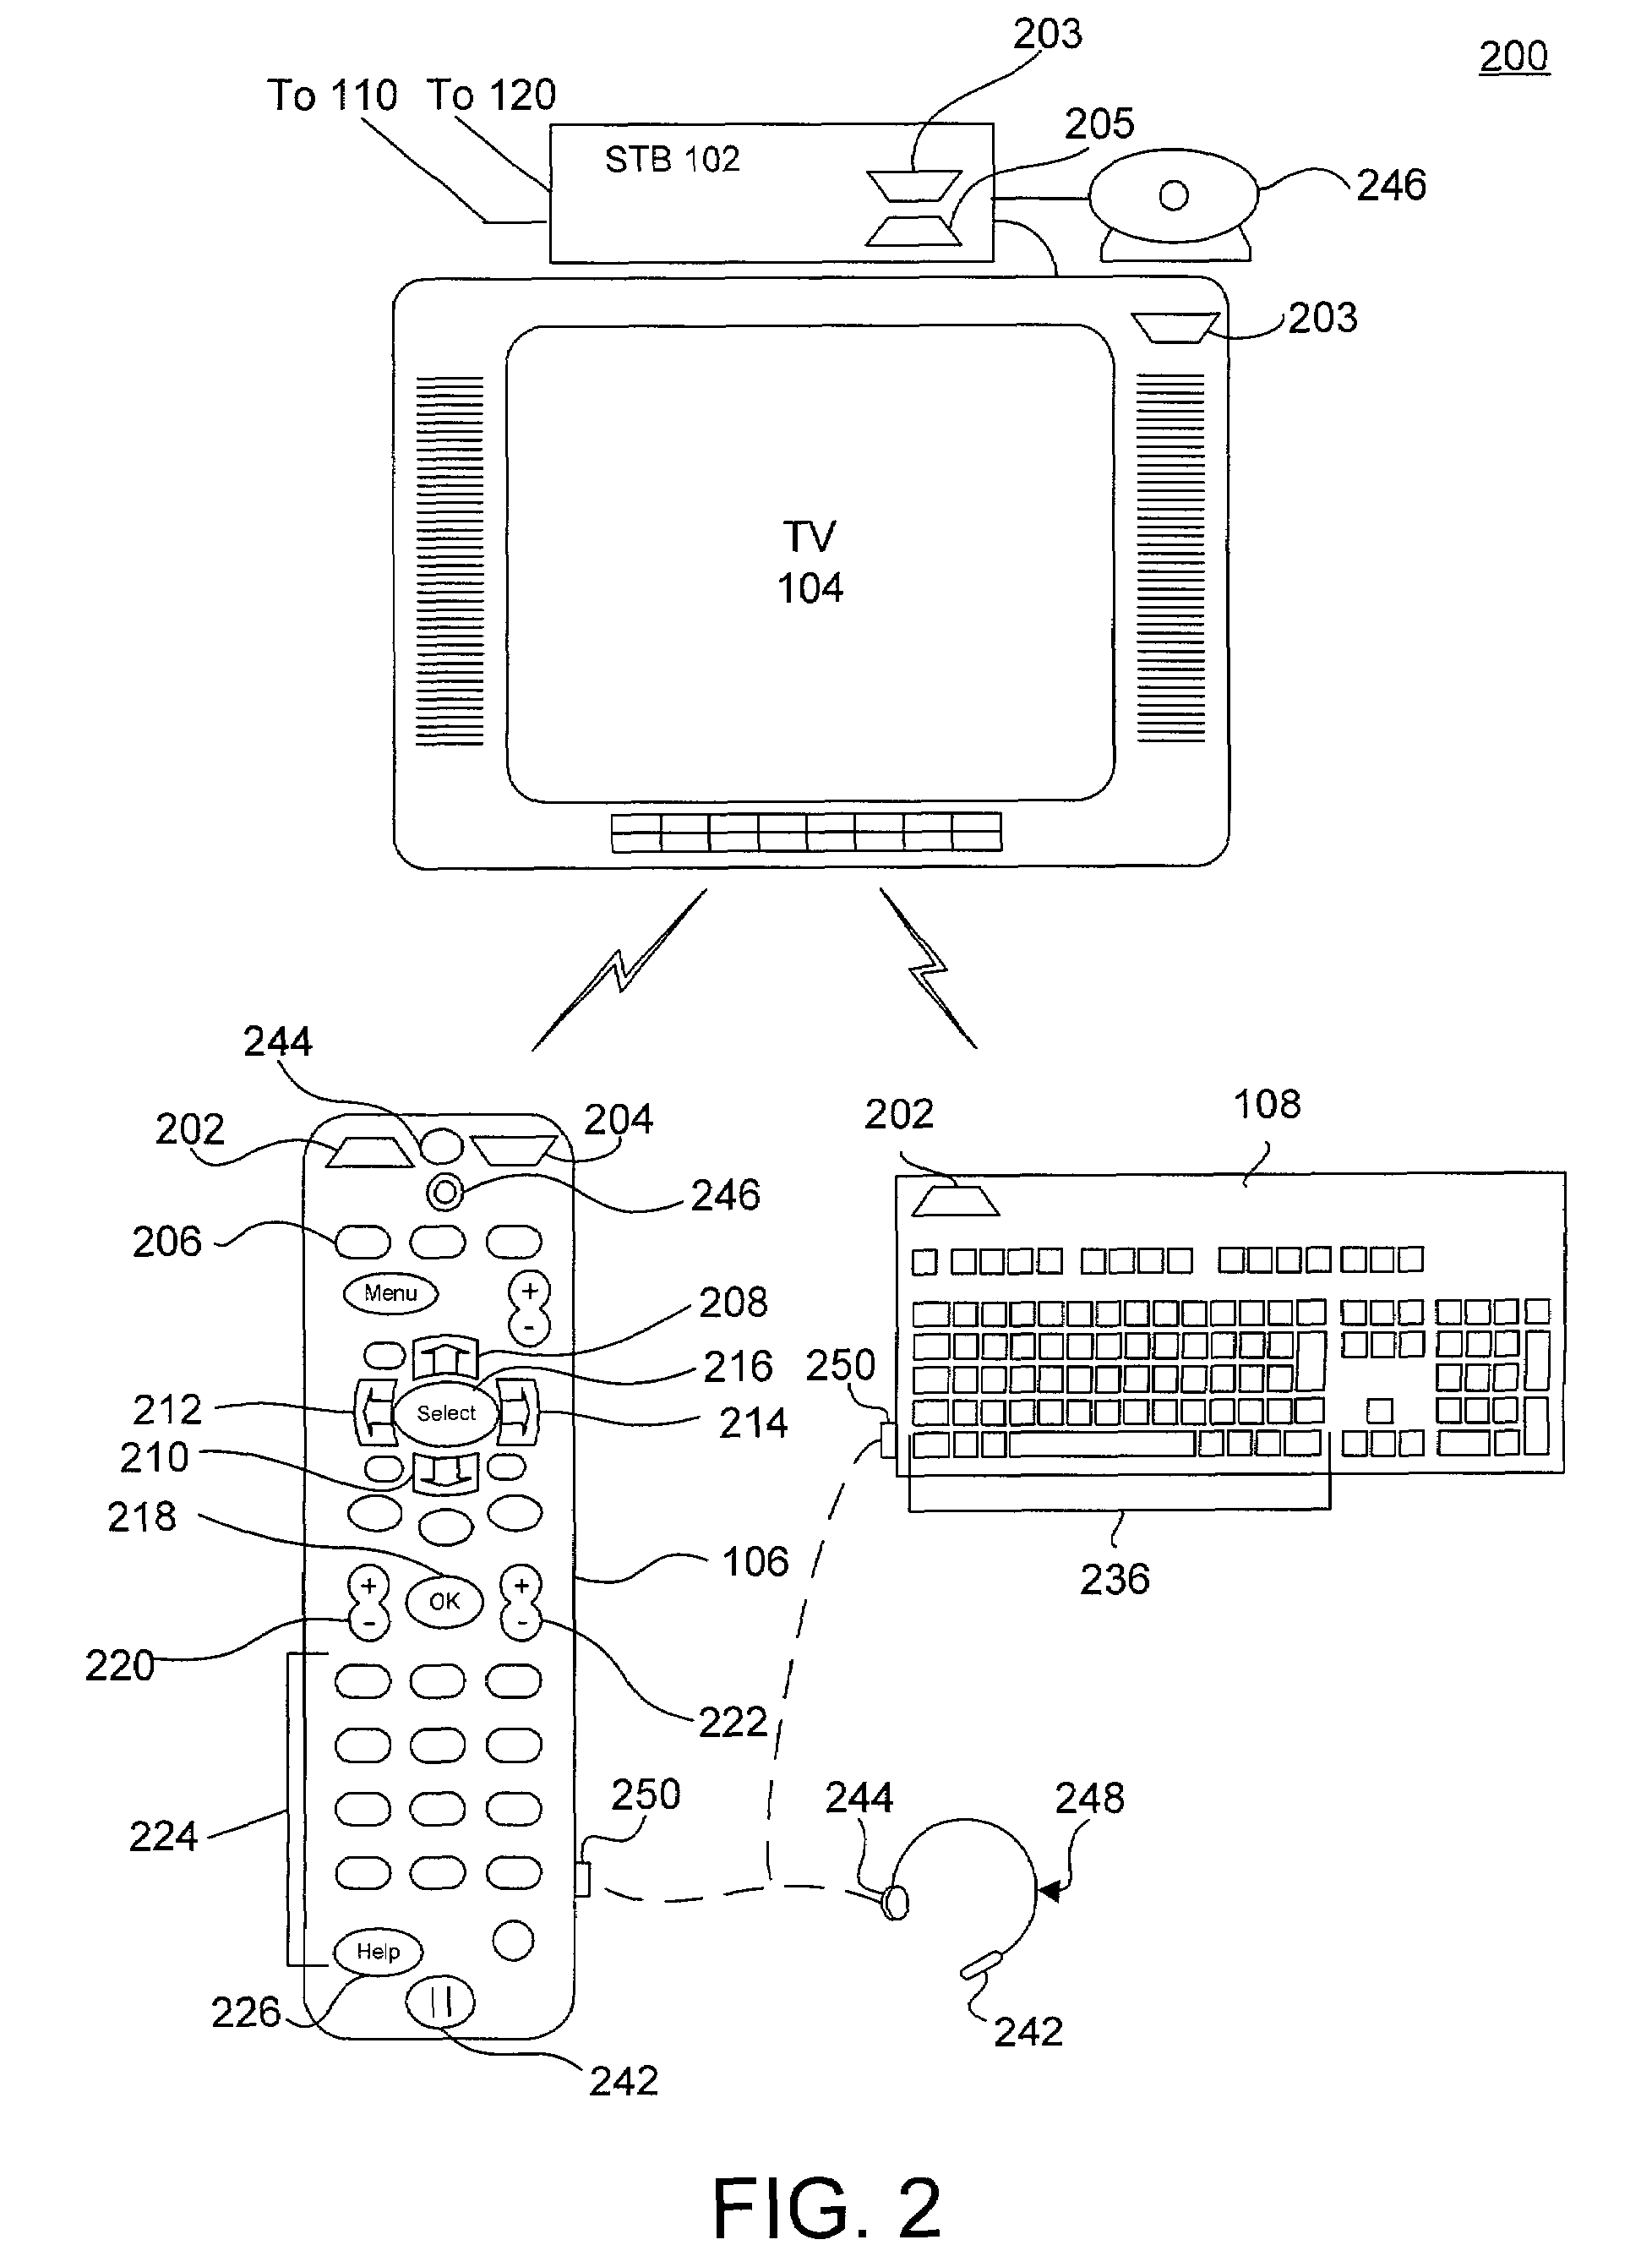 Method and system for distributing personalized editions of media programs using bookmarks